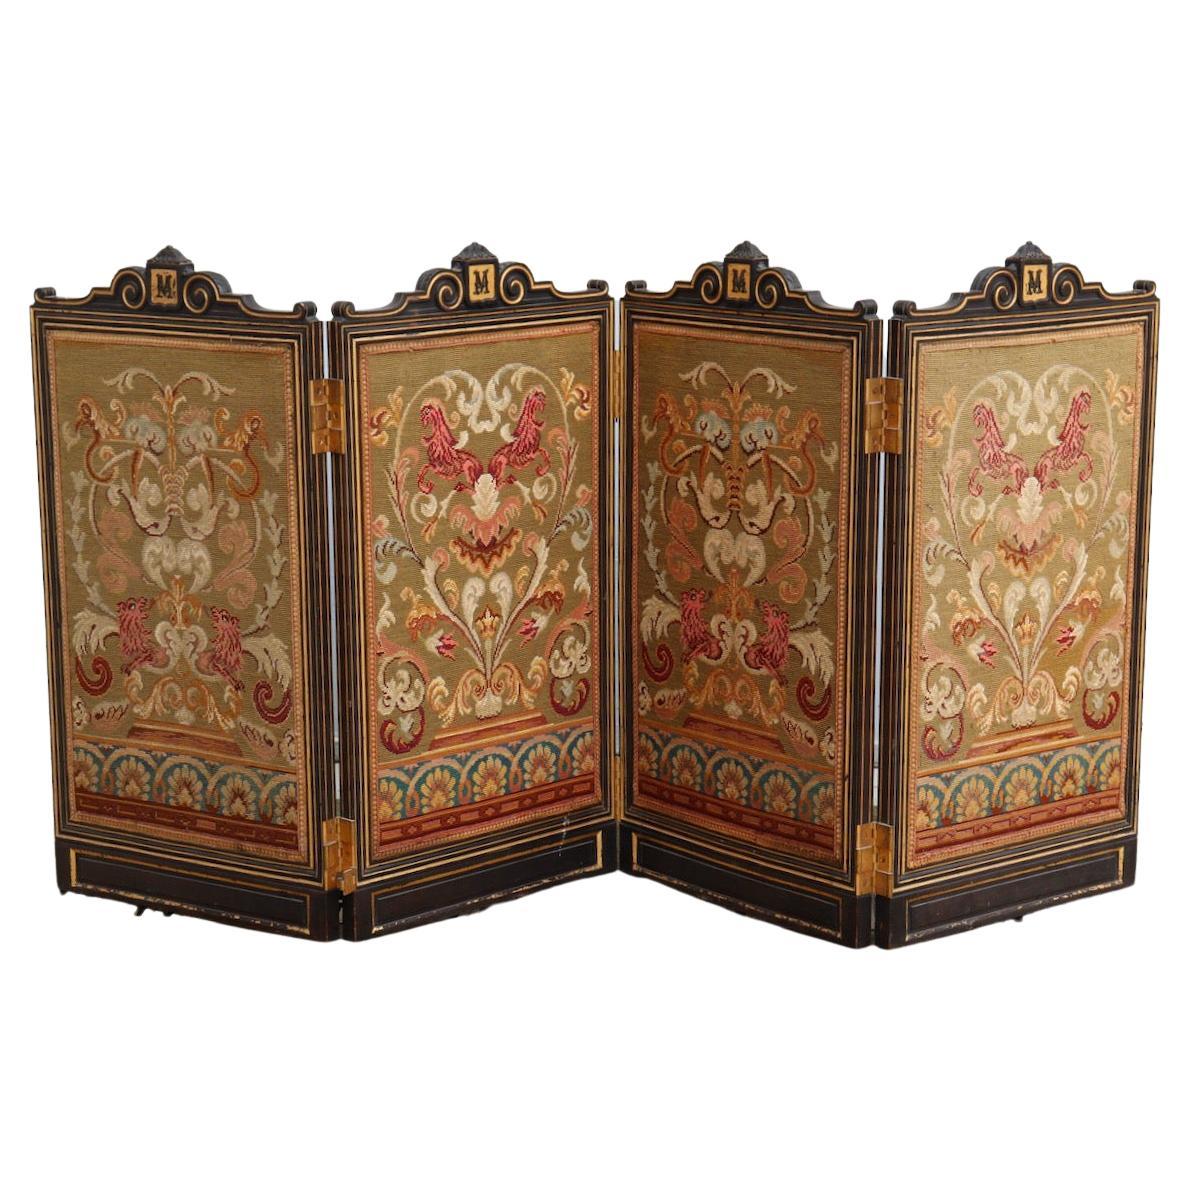 Black Lacquered and Gilt Wood Victorian Foldable Fire Screen, 19th Century